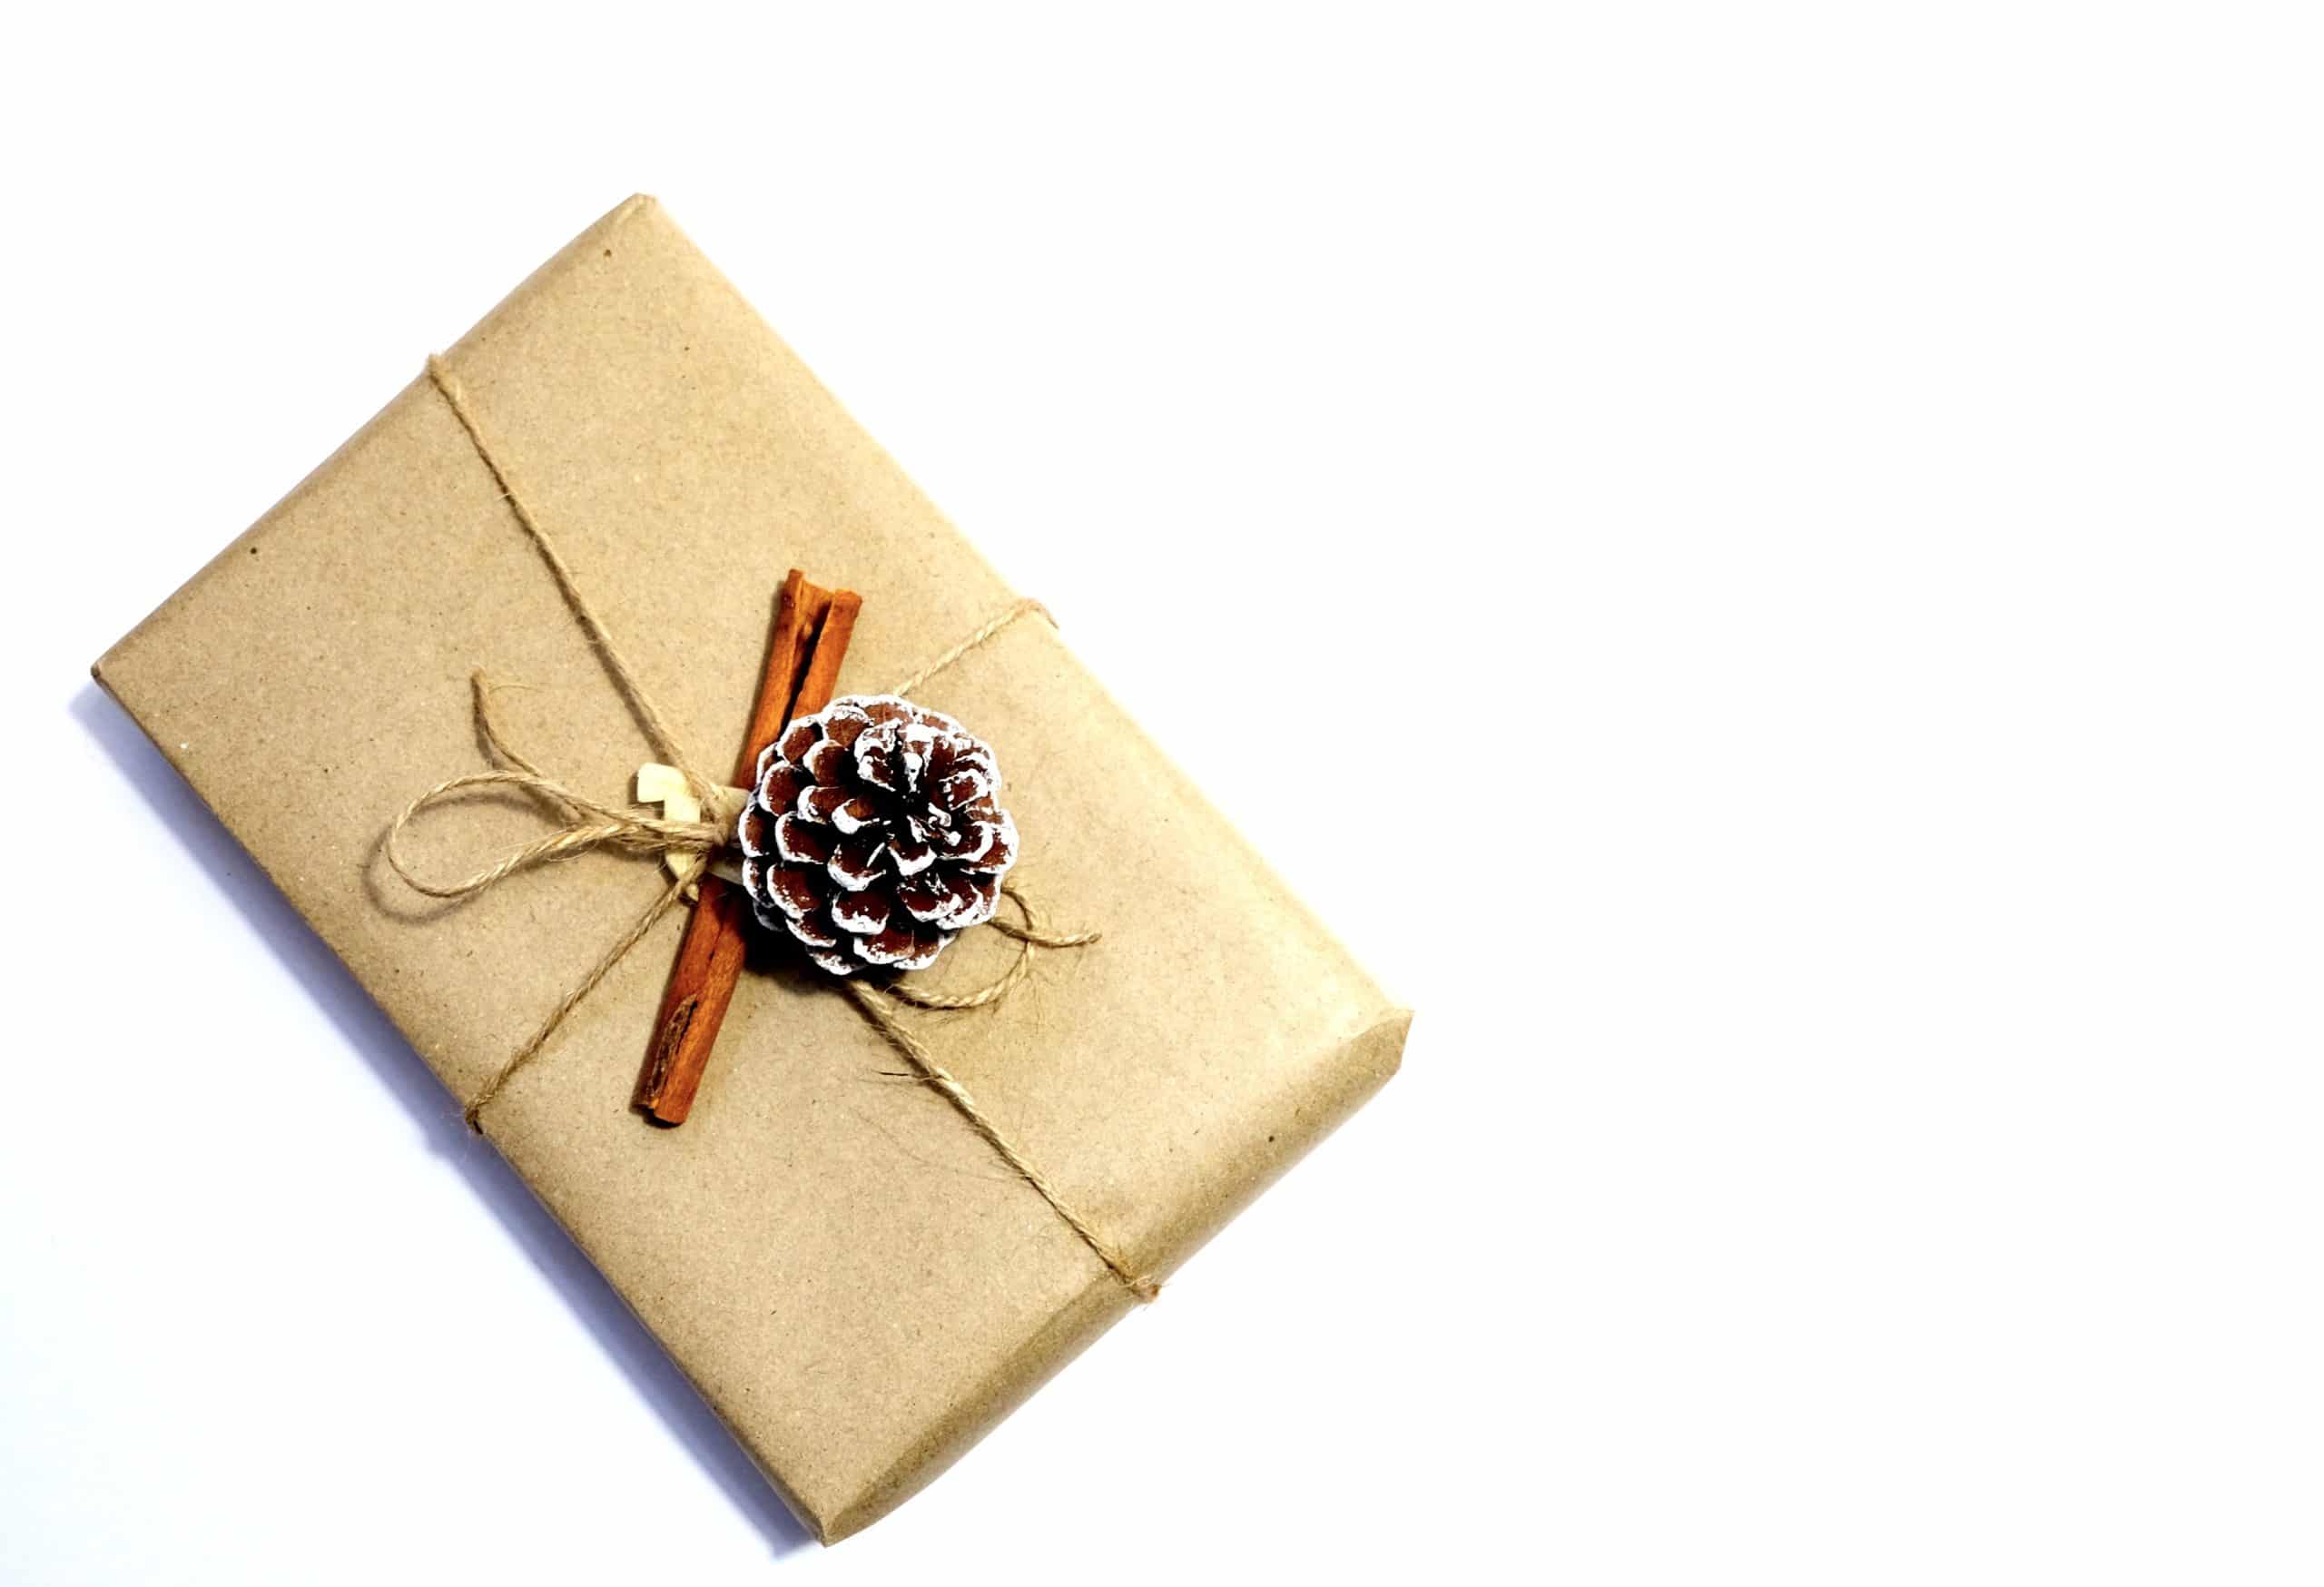 Gift wrapped in brown paper with a pinecone